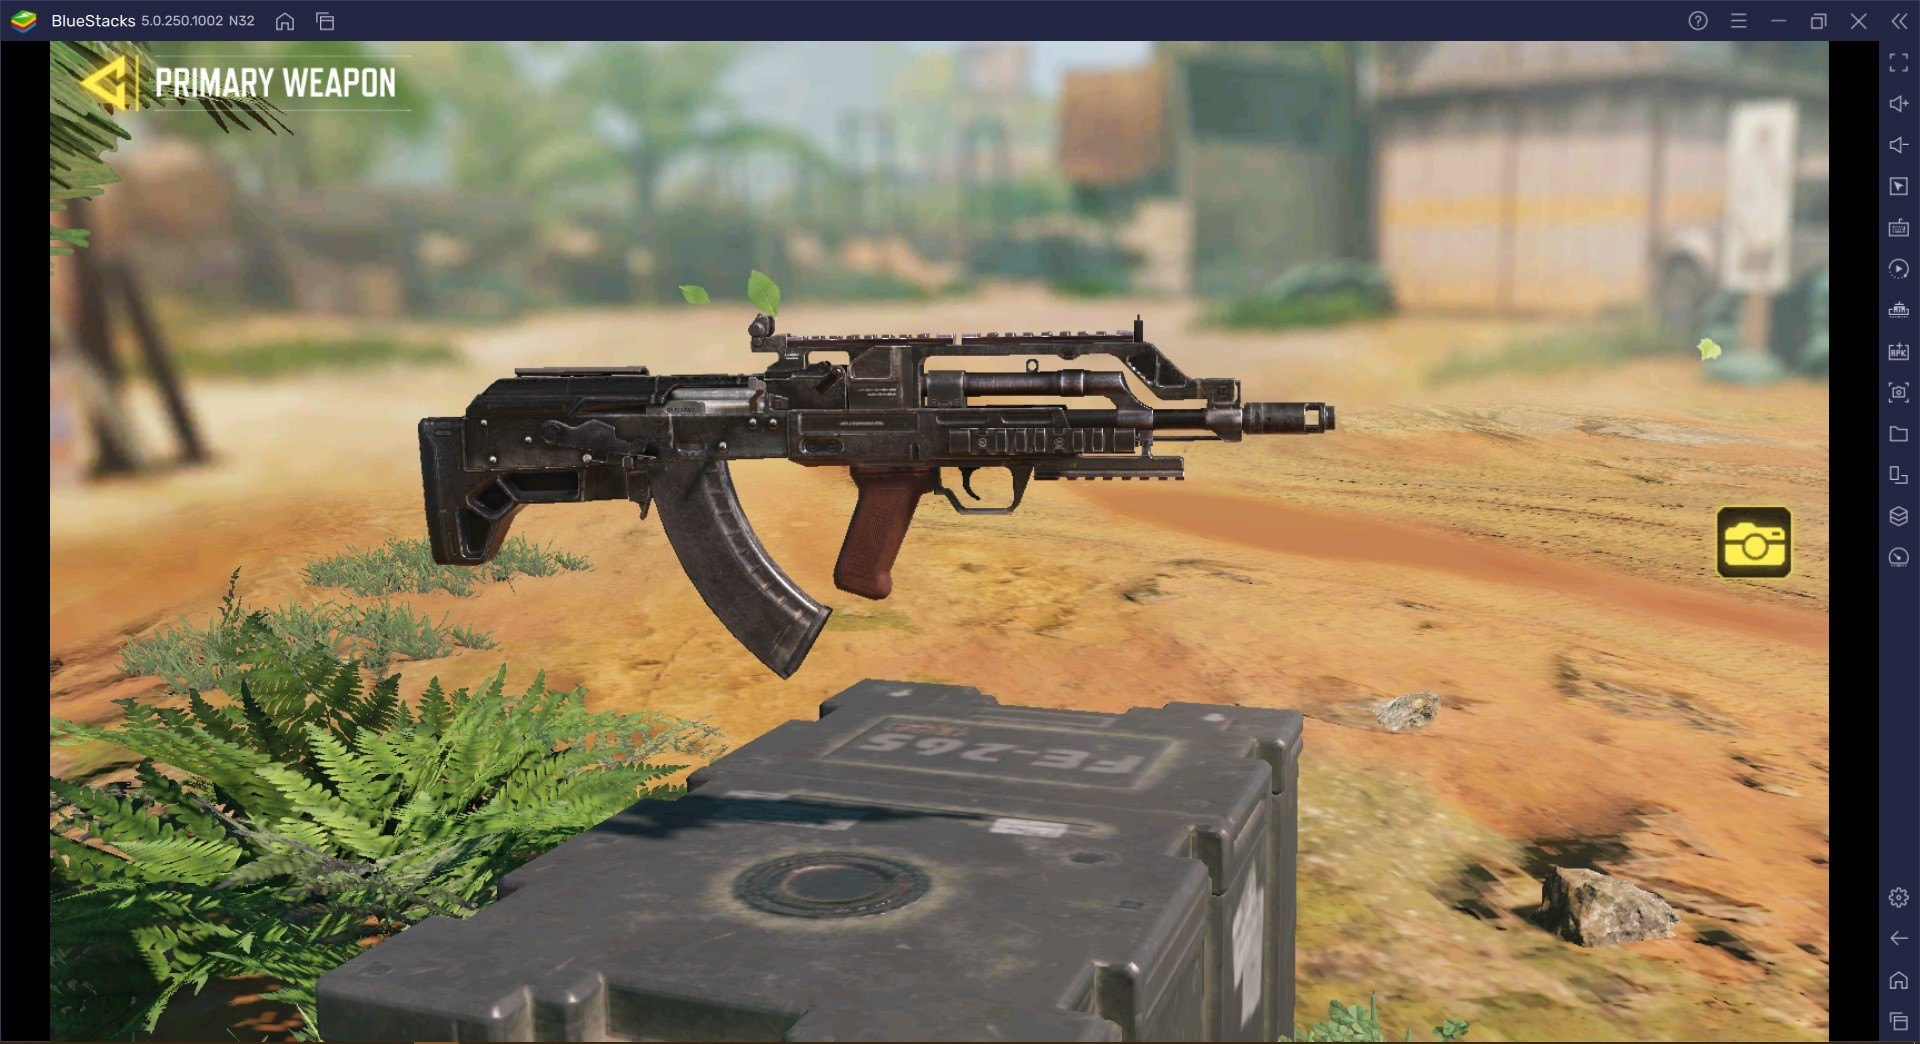 Call of Duty: Mobile - Season 5 Gun Guide - Learn About the New Top Guns